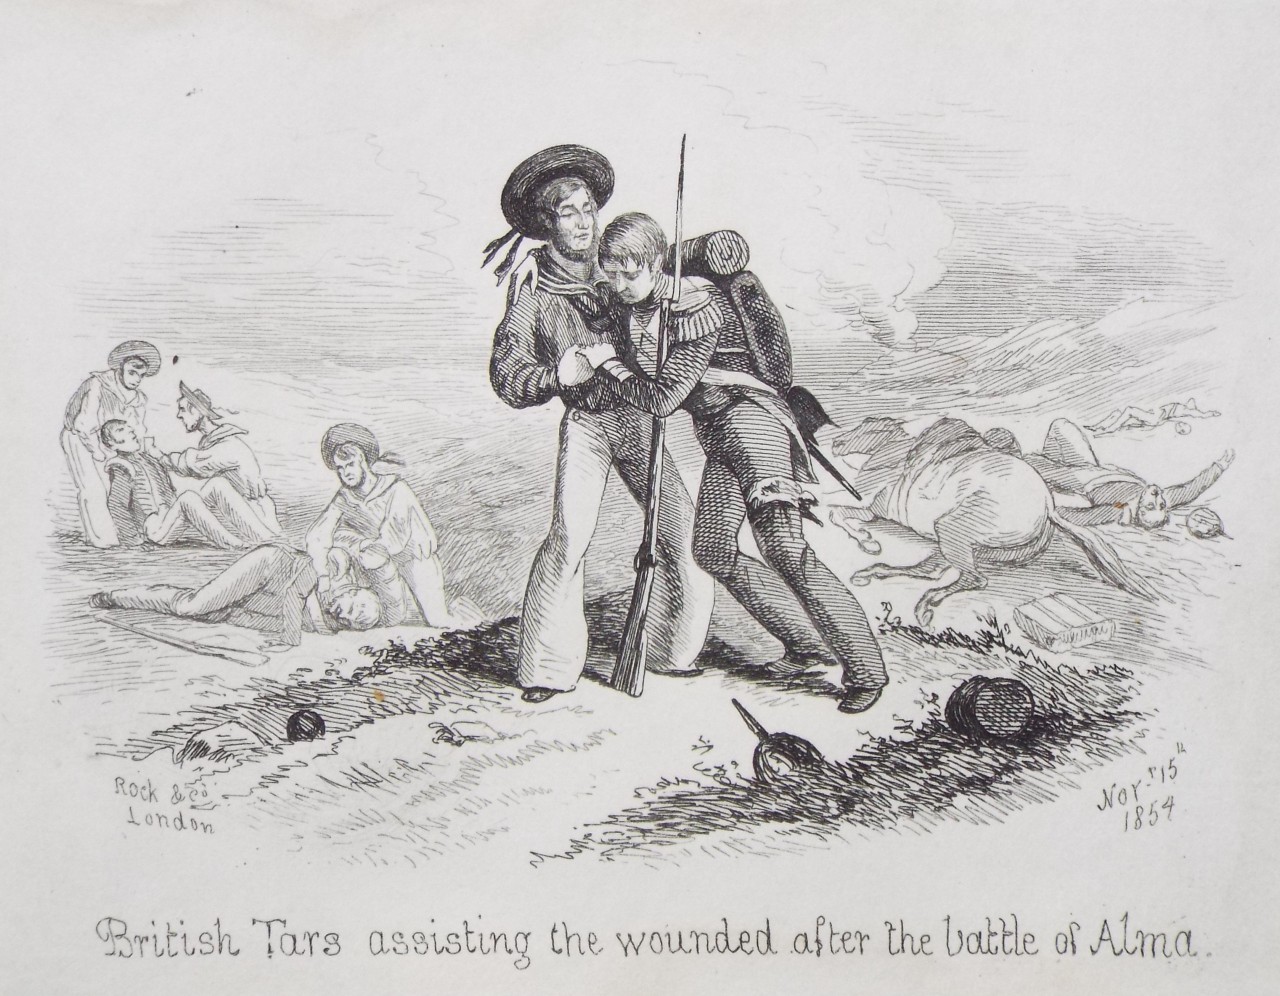 Steel Vignette - British Tars assisting the wounded after the battle of Alma. - Rock